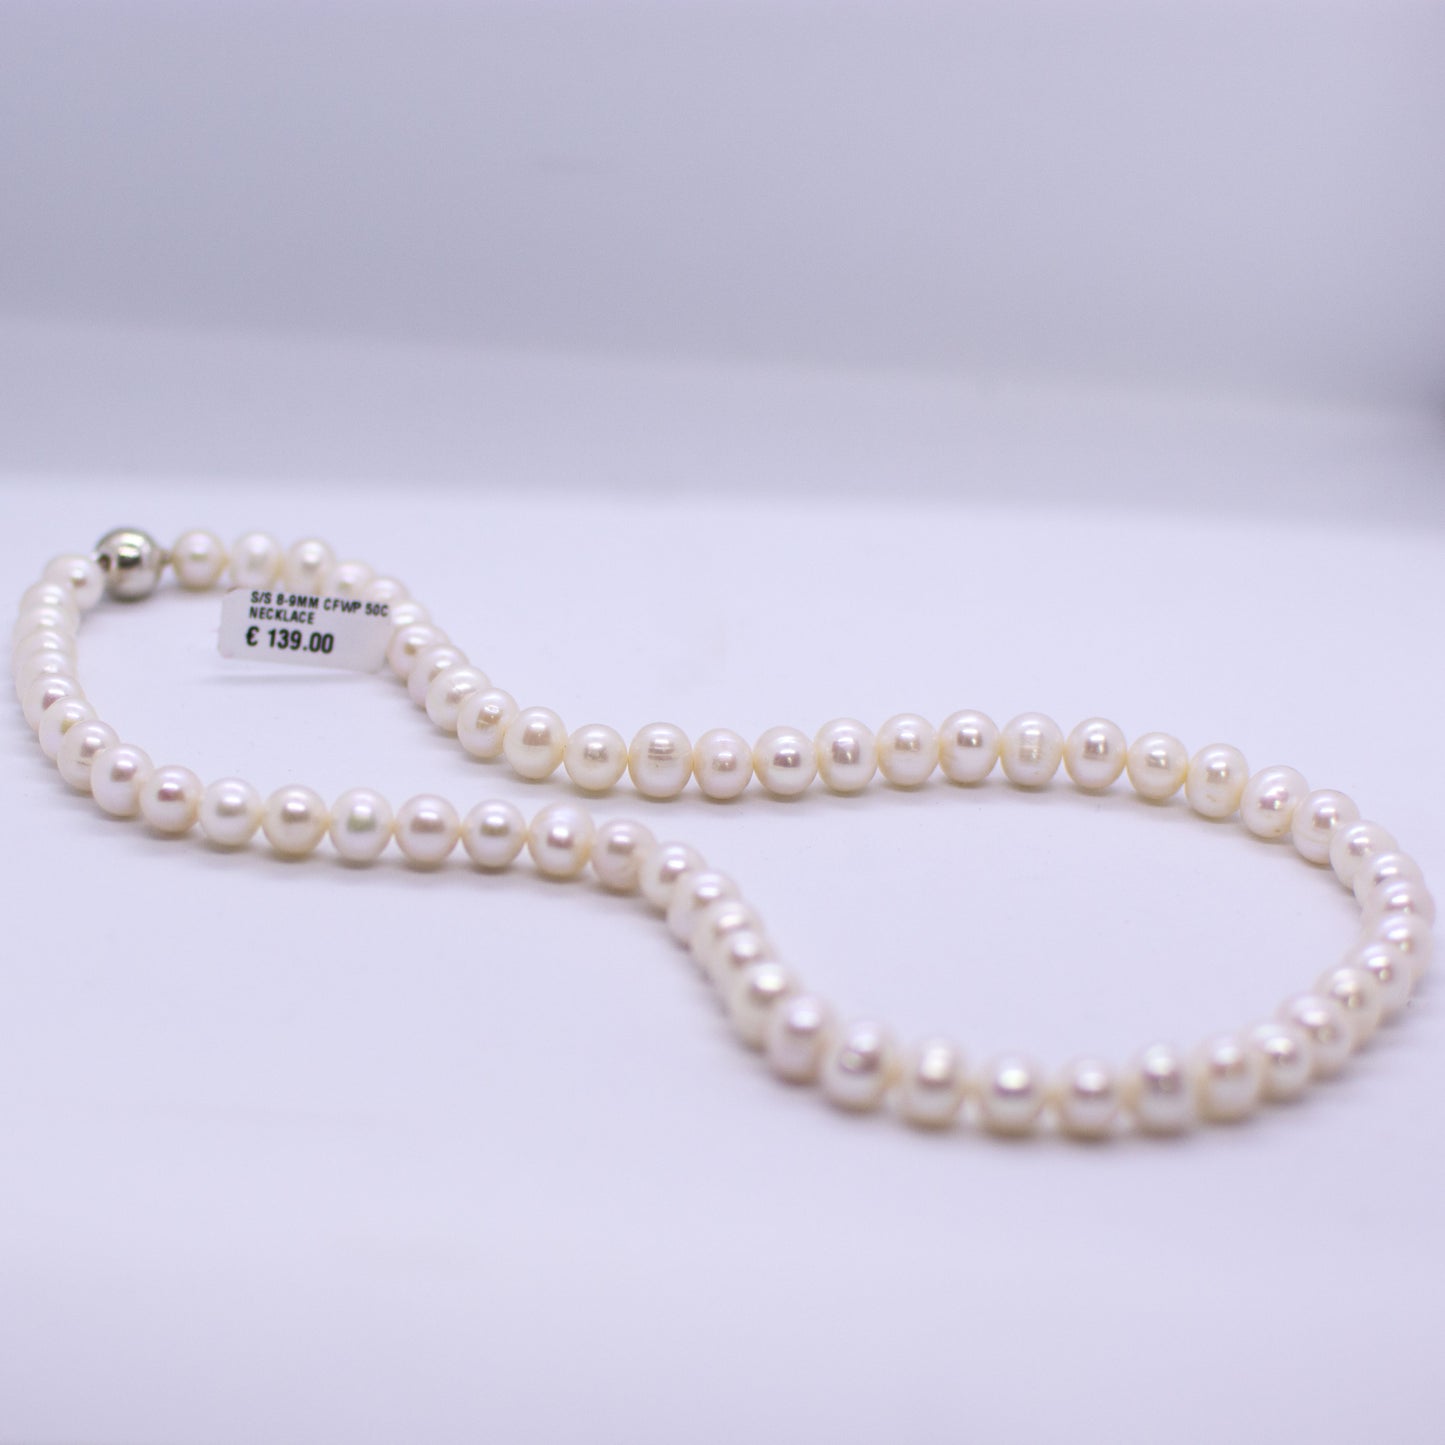 Cultured Freshwater Pearl Necklace - 8-9mm|50cm - John Ross Jewellers